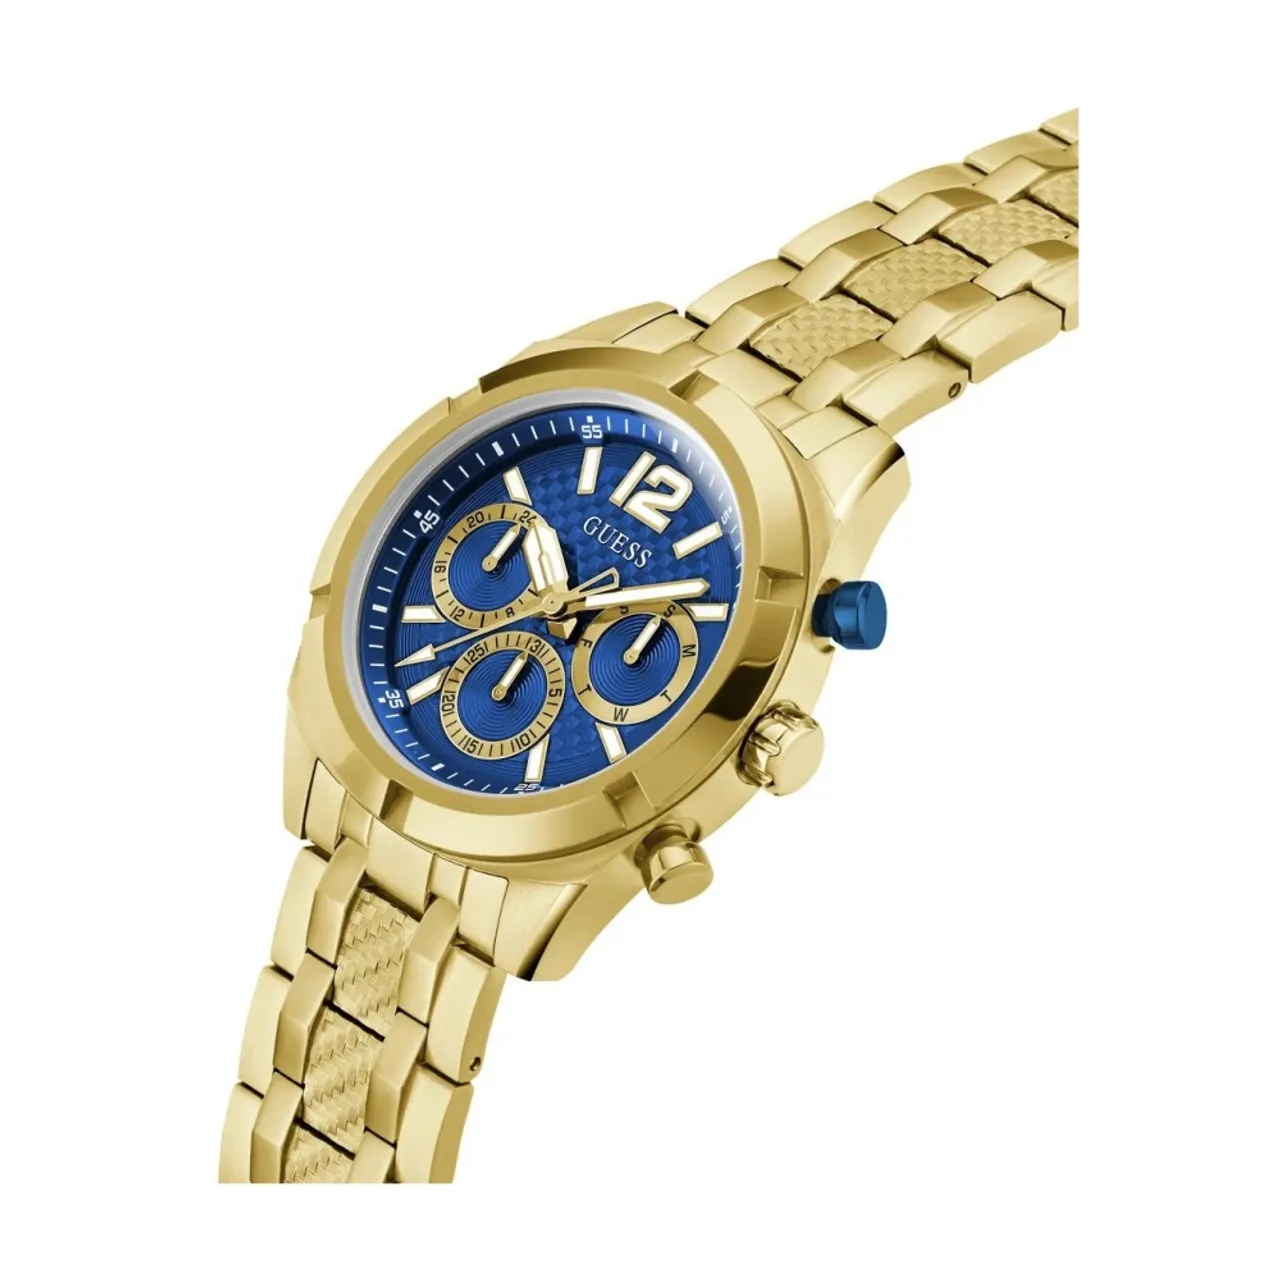 Resistance Multifunktionsuhr Gold Blau Guess